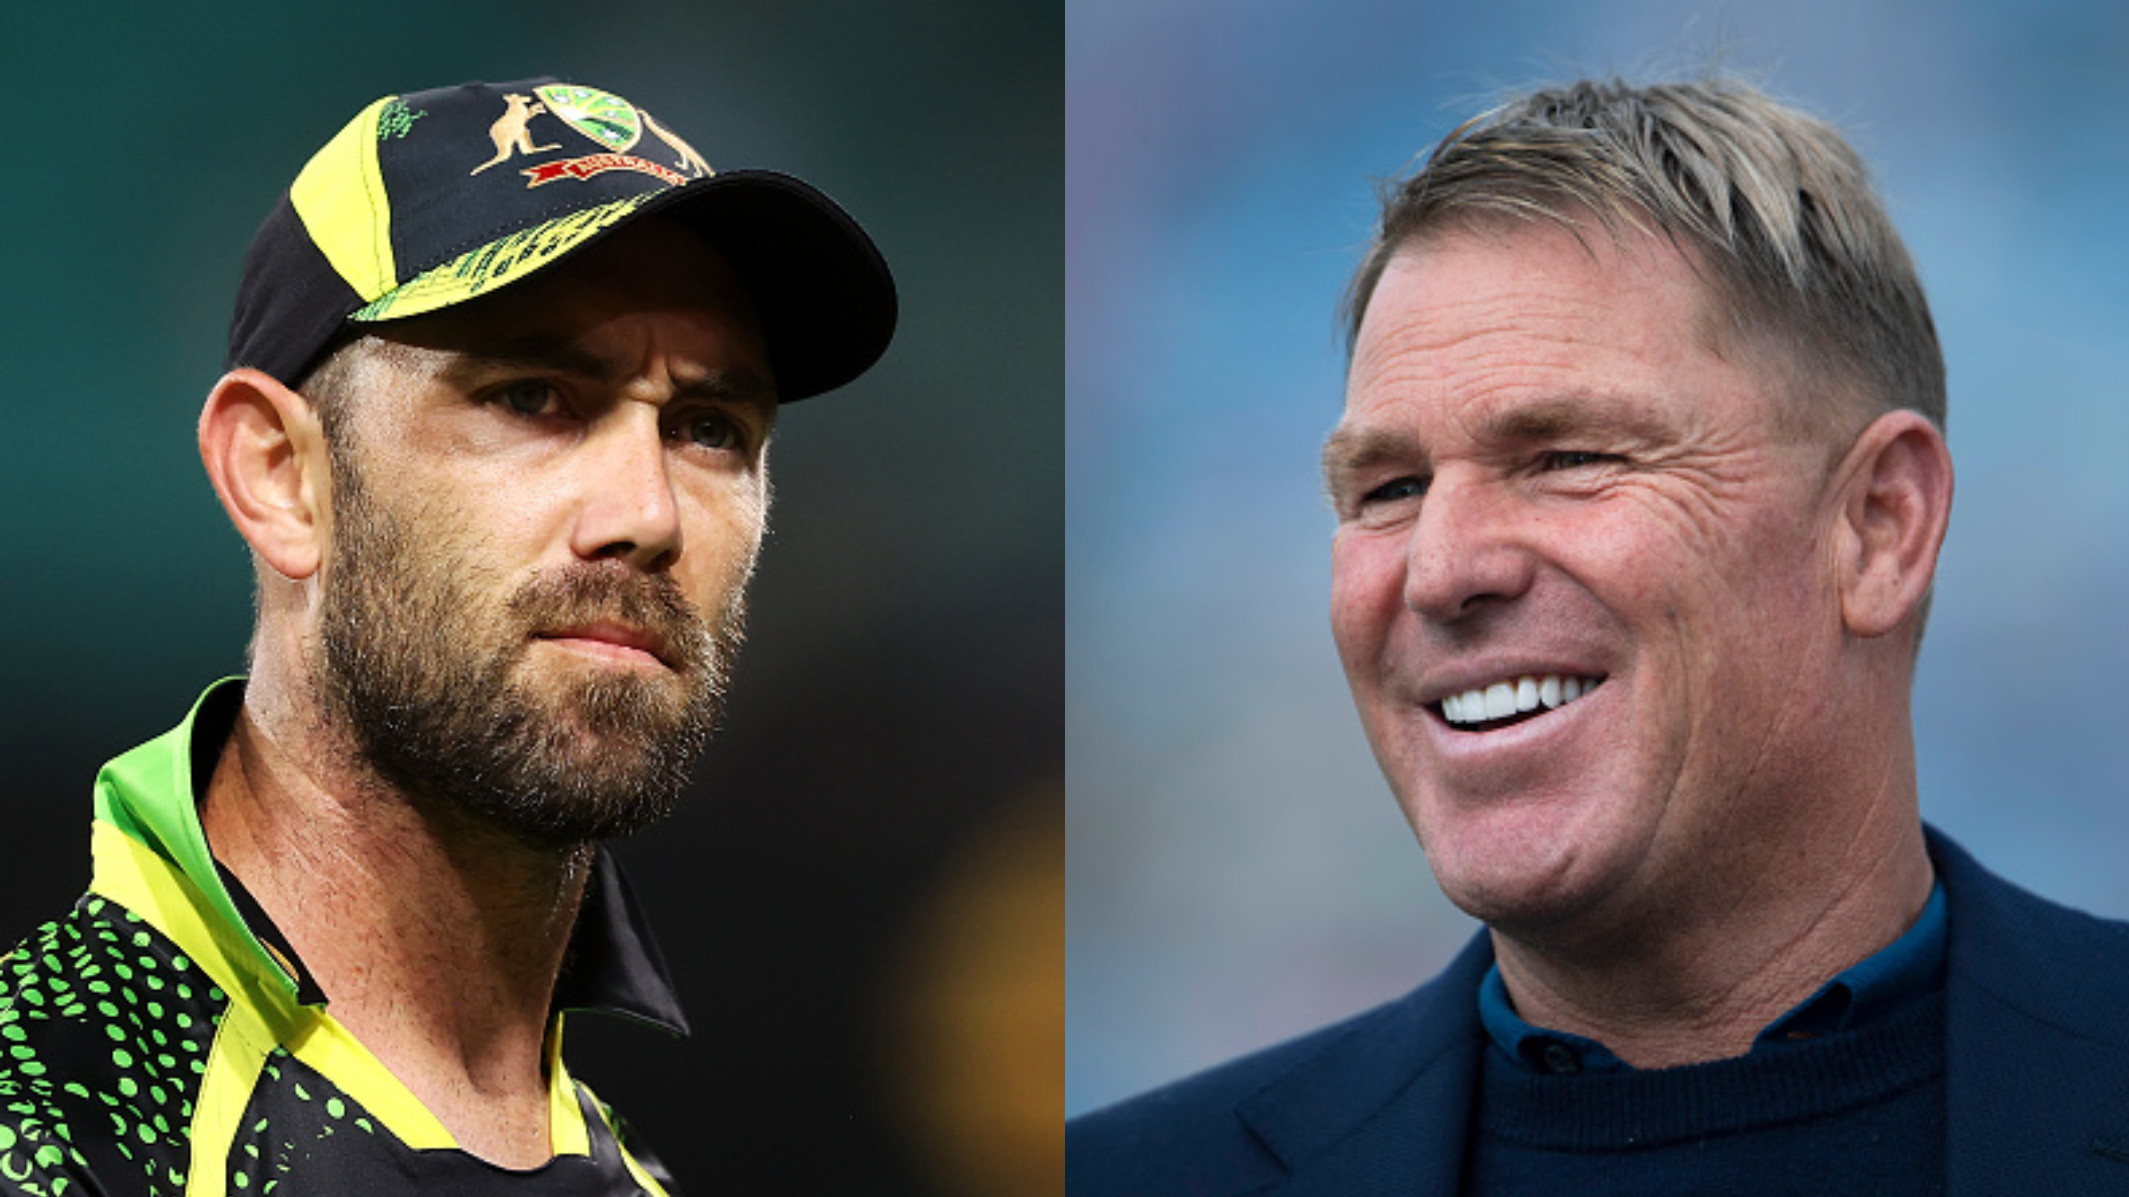 Glenn Maxwell chokes up during live interview as he pays his tribute to Shane Warne after his death